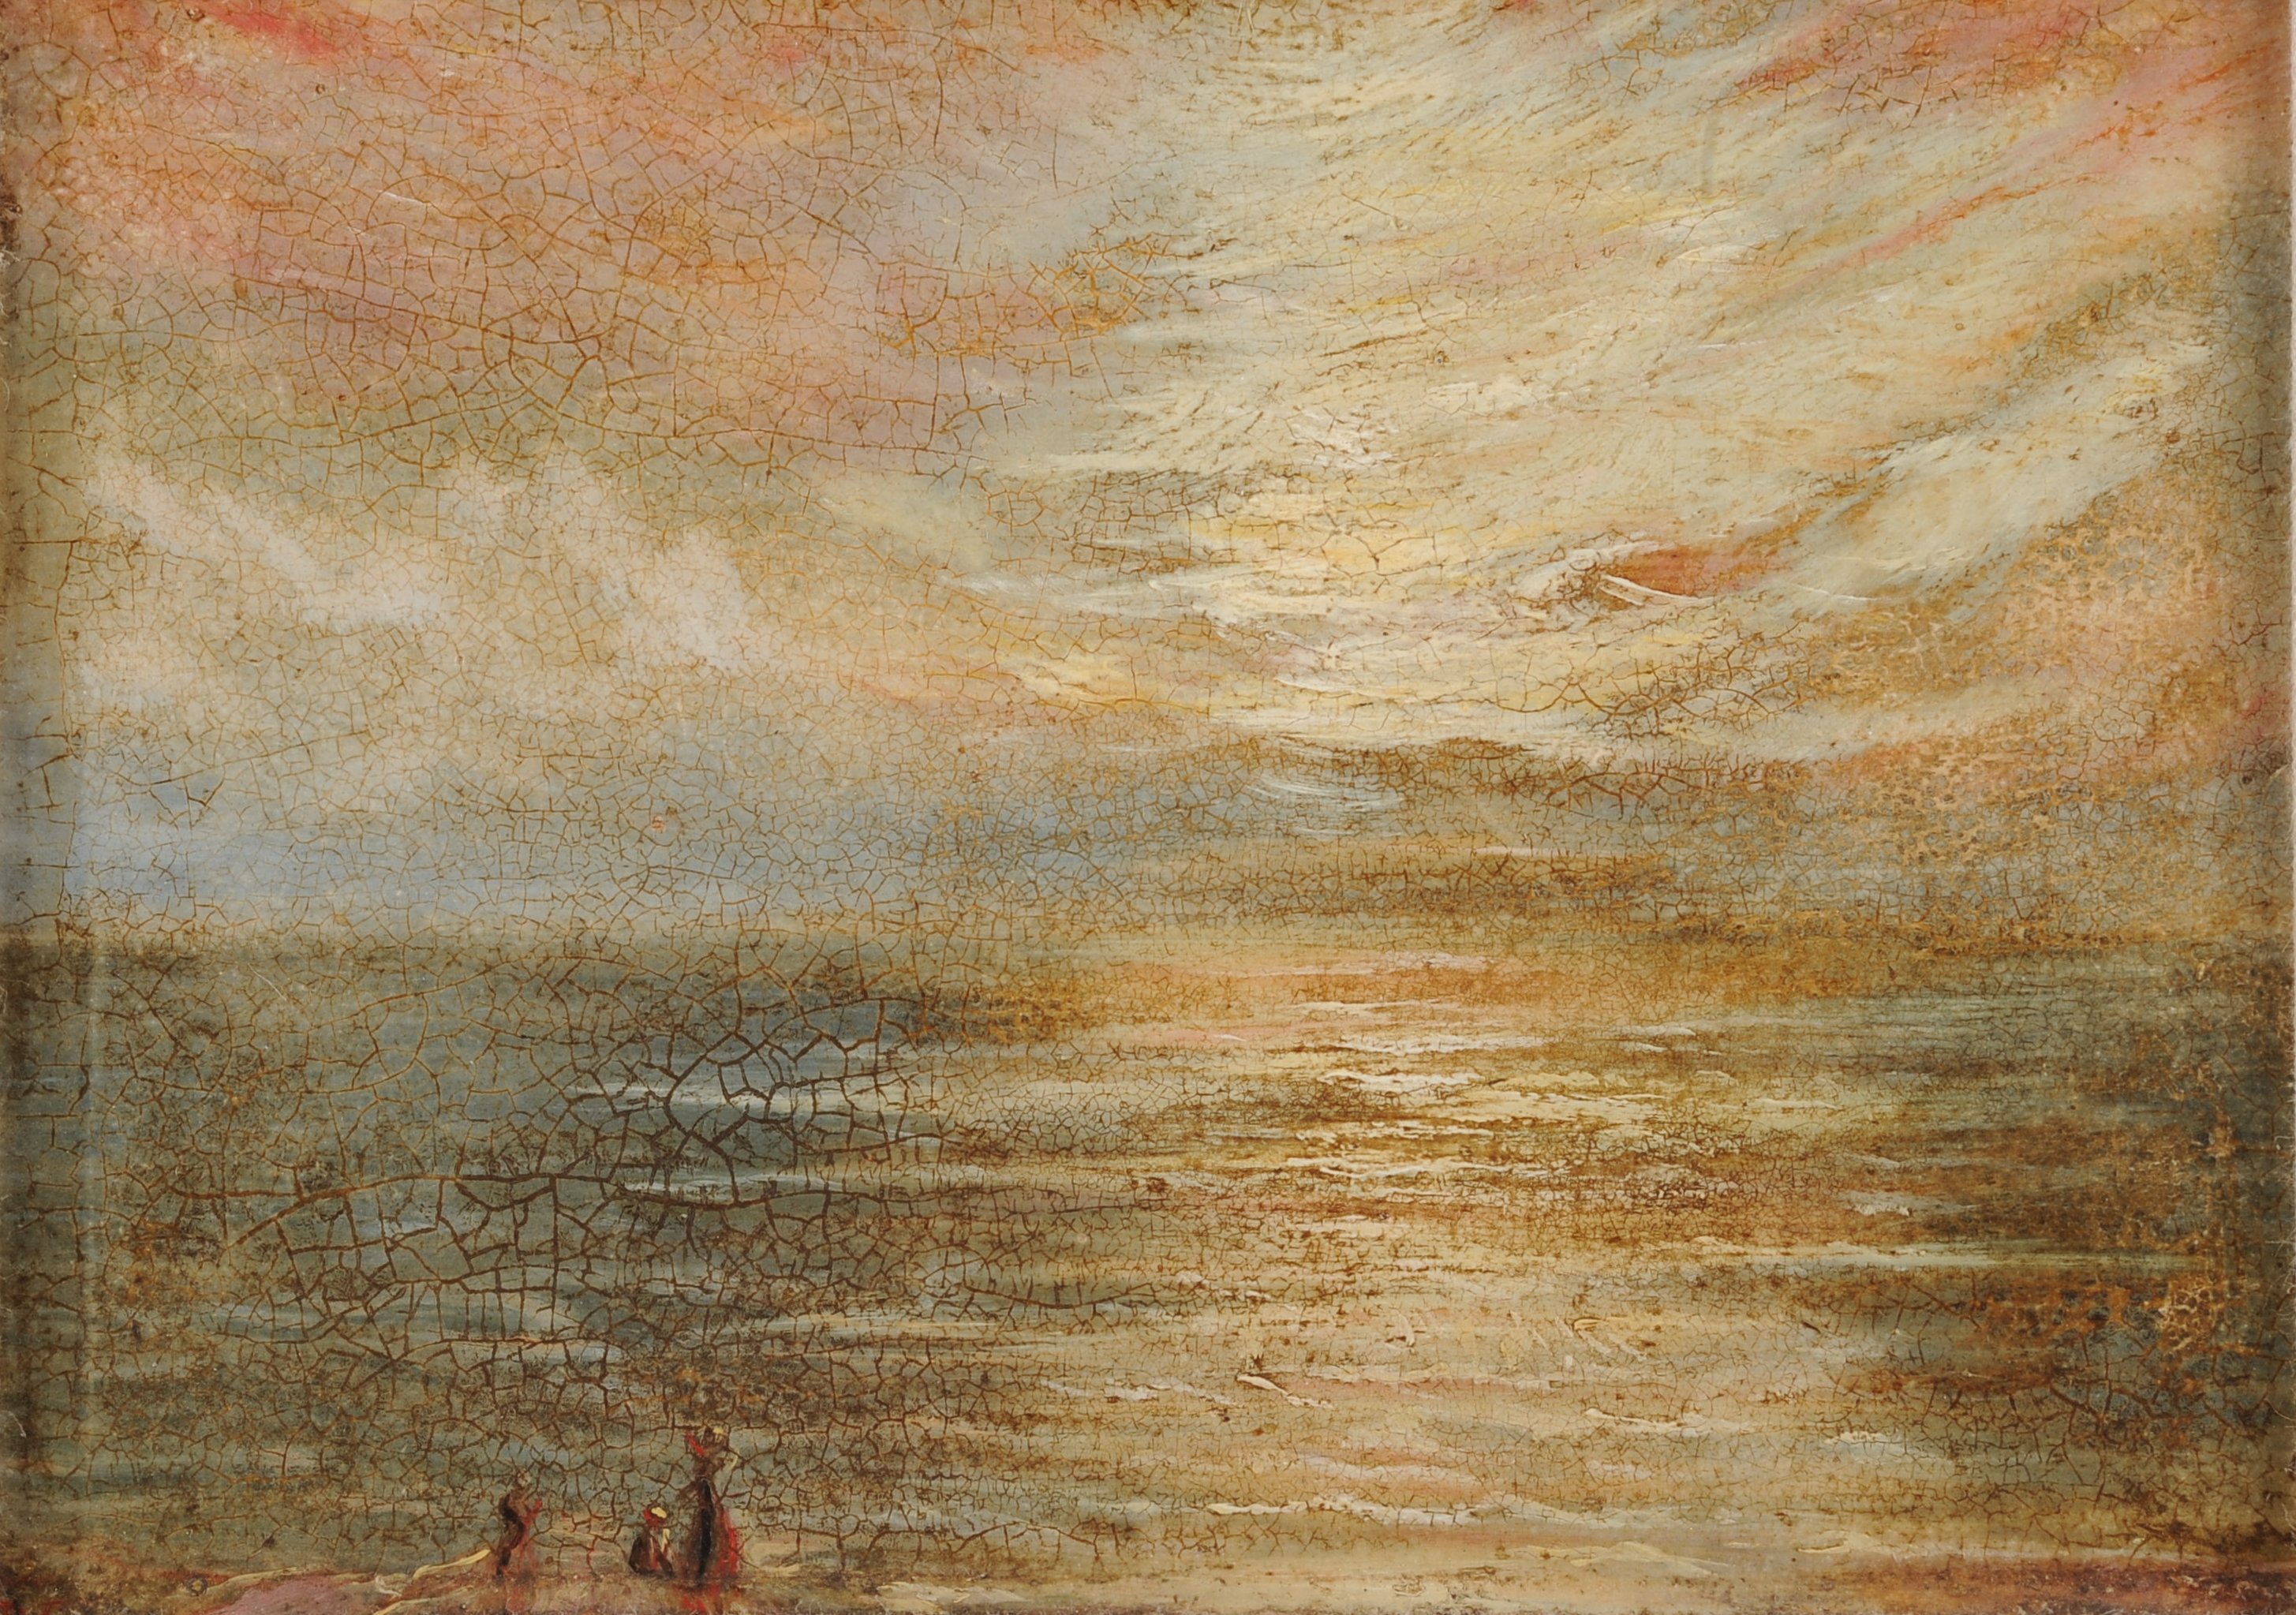 GEORGE WEATHERILL (British 1810-1890), Sunrise off Whitby, oil on paper laid on canvas, initialled W